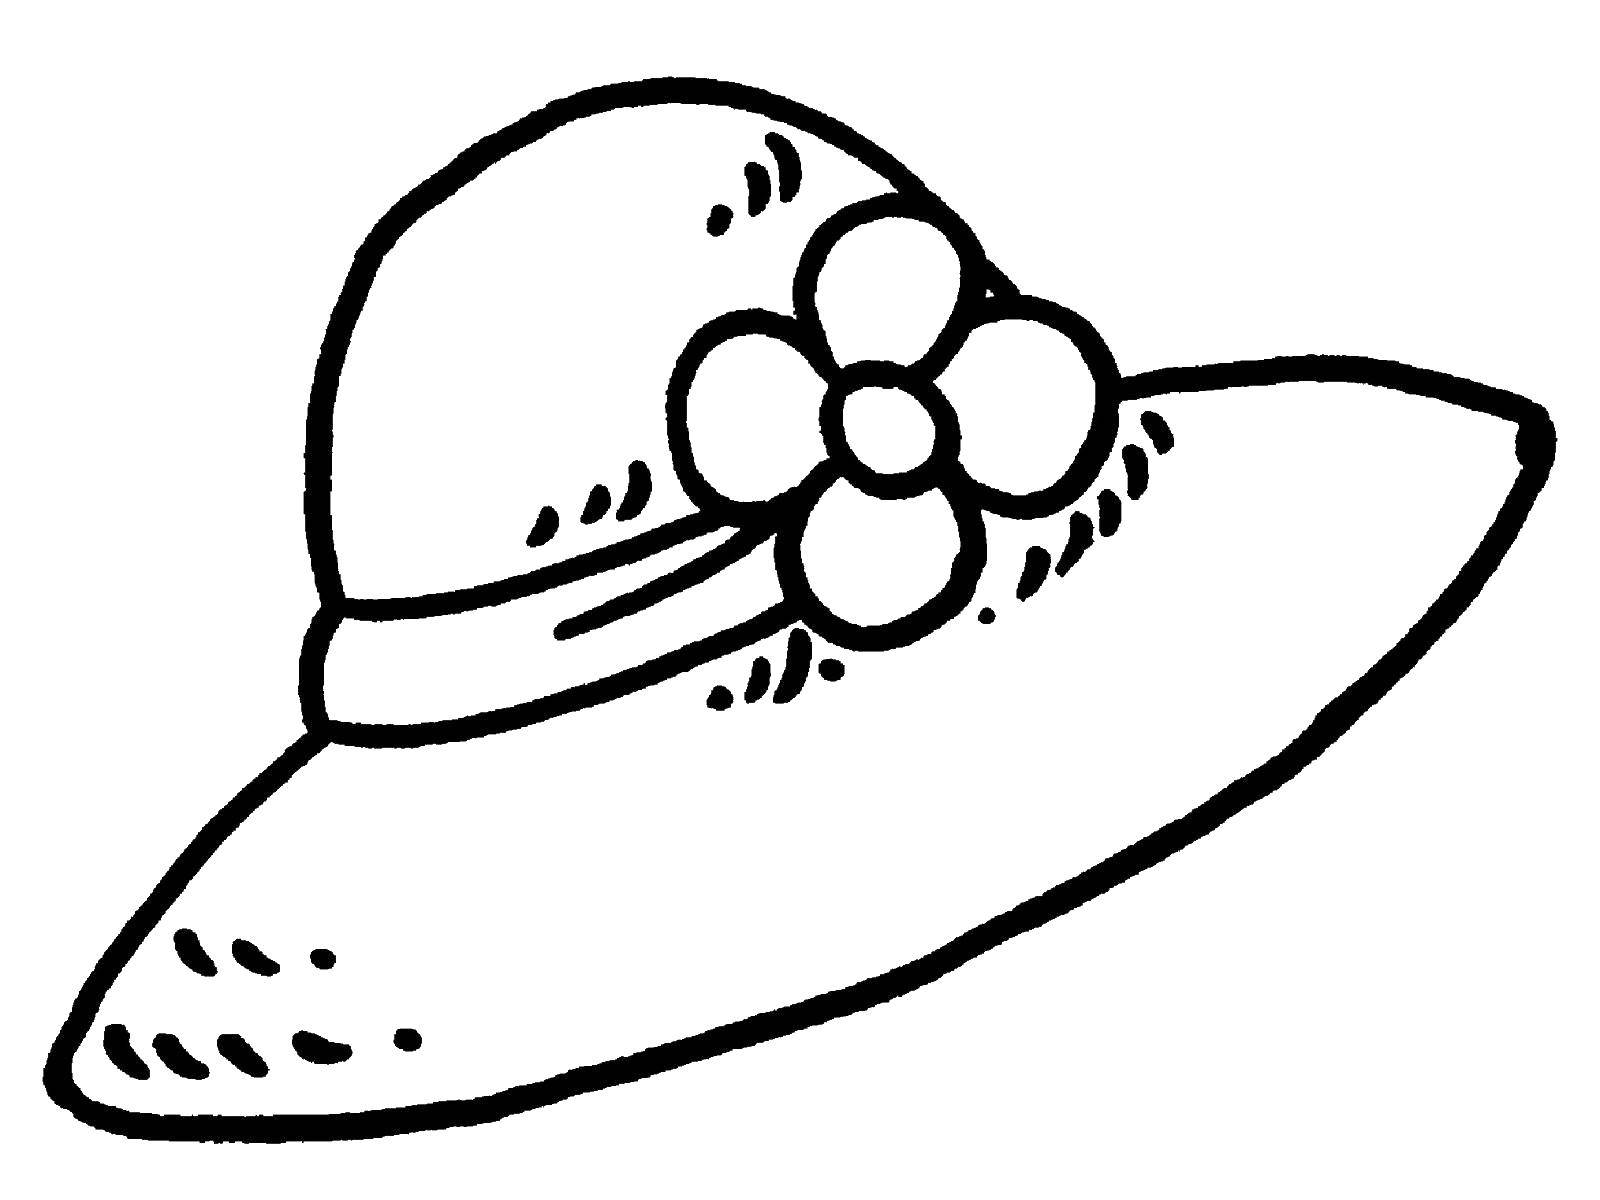 Coloring Hat. Category clothing. Tags:  The hat.